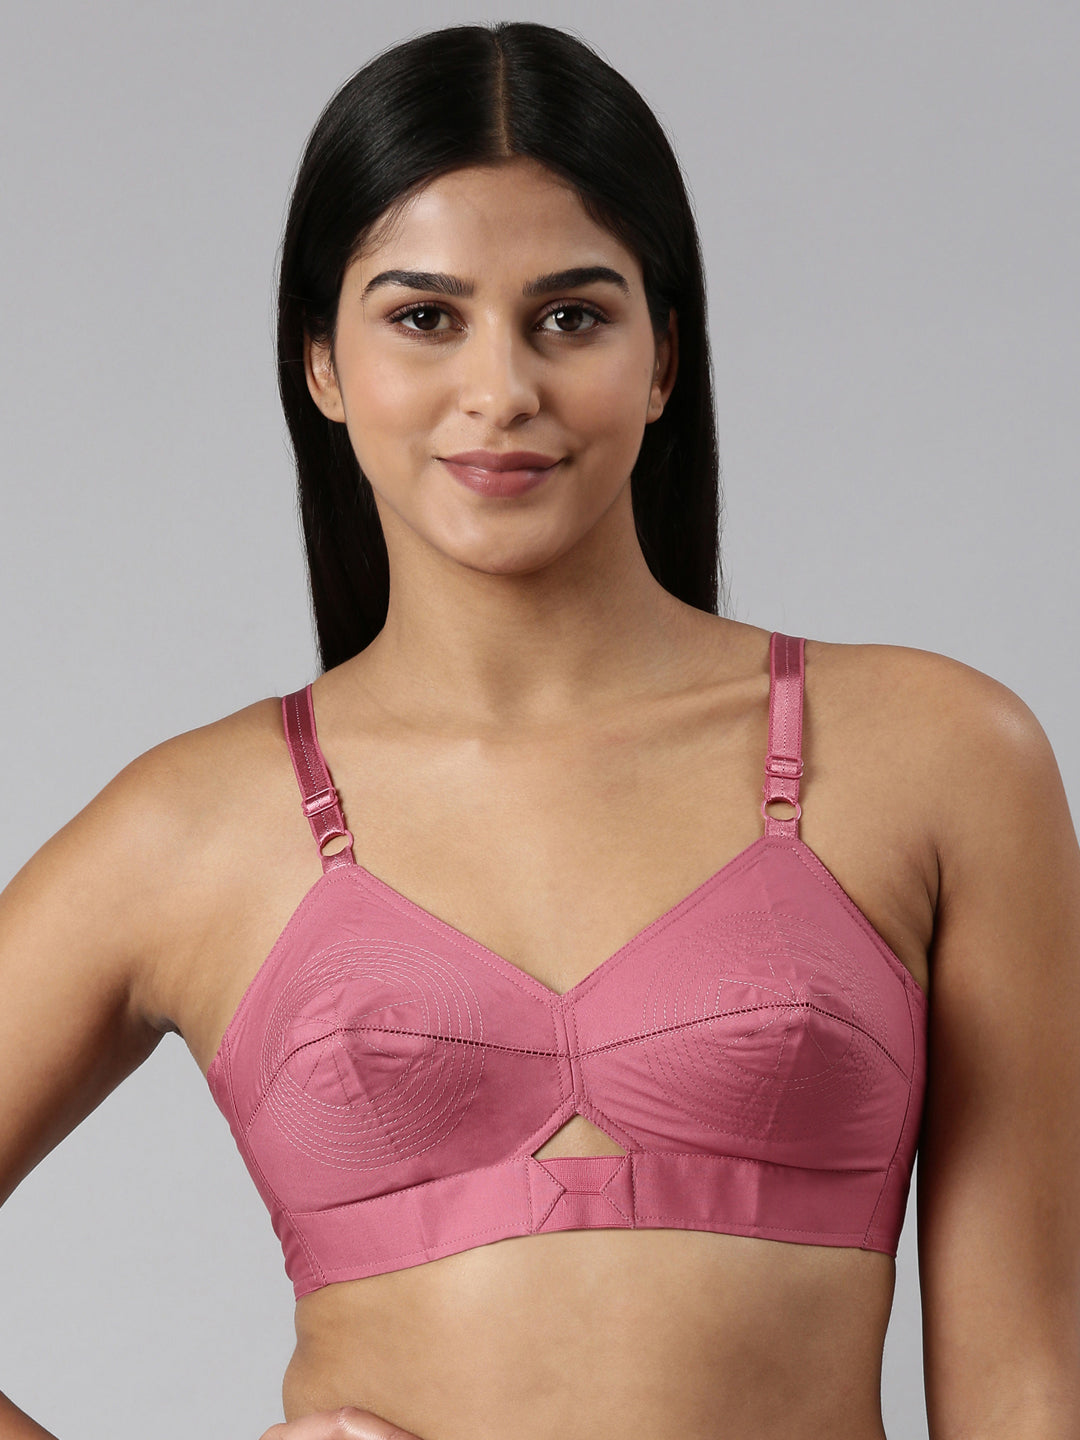 blossom-authentic bra-C & D Cups-rose gold1-Woven cotton-everyday bra